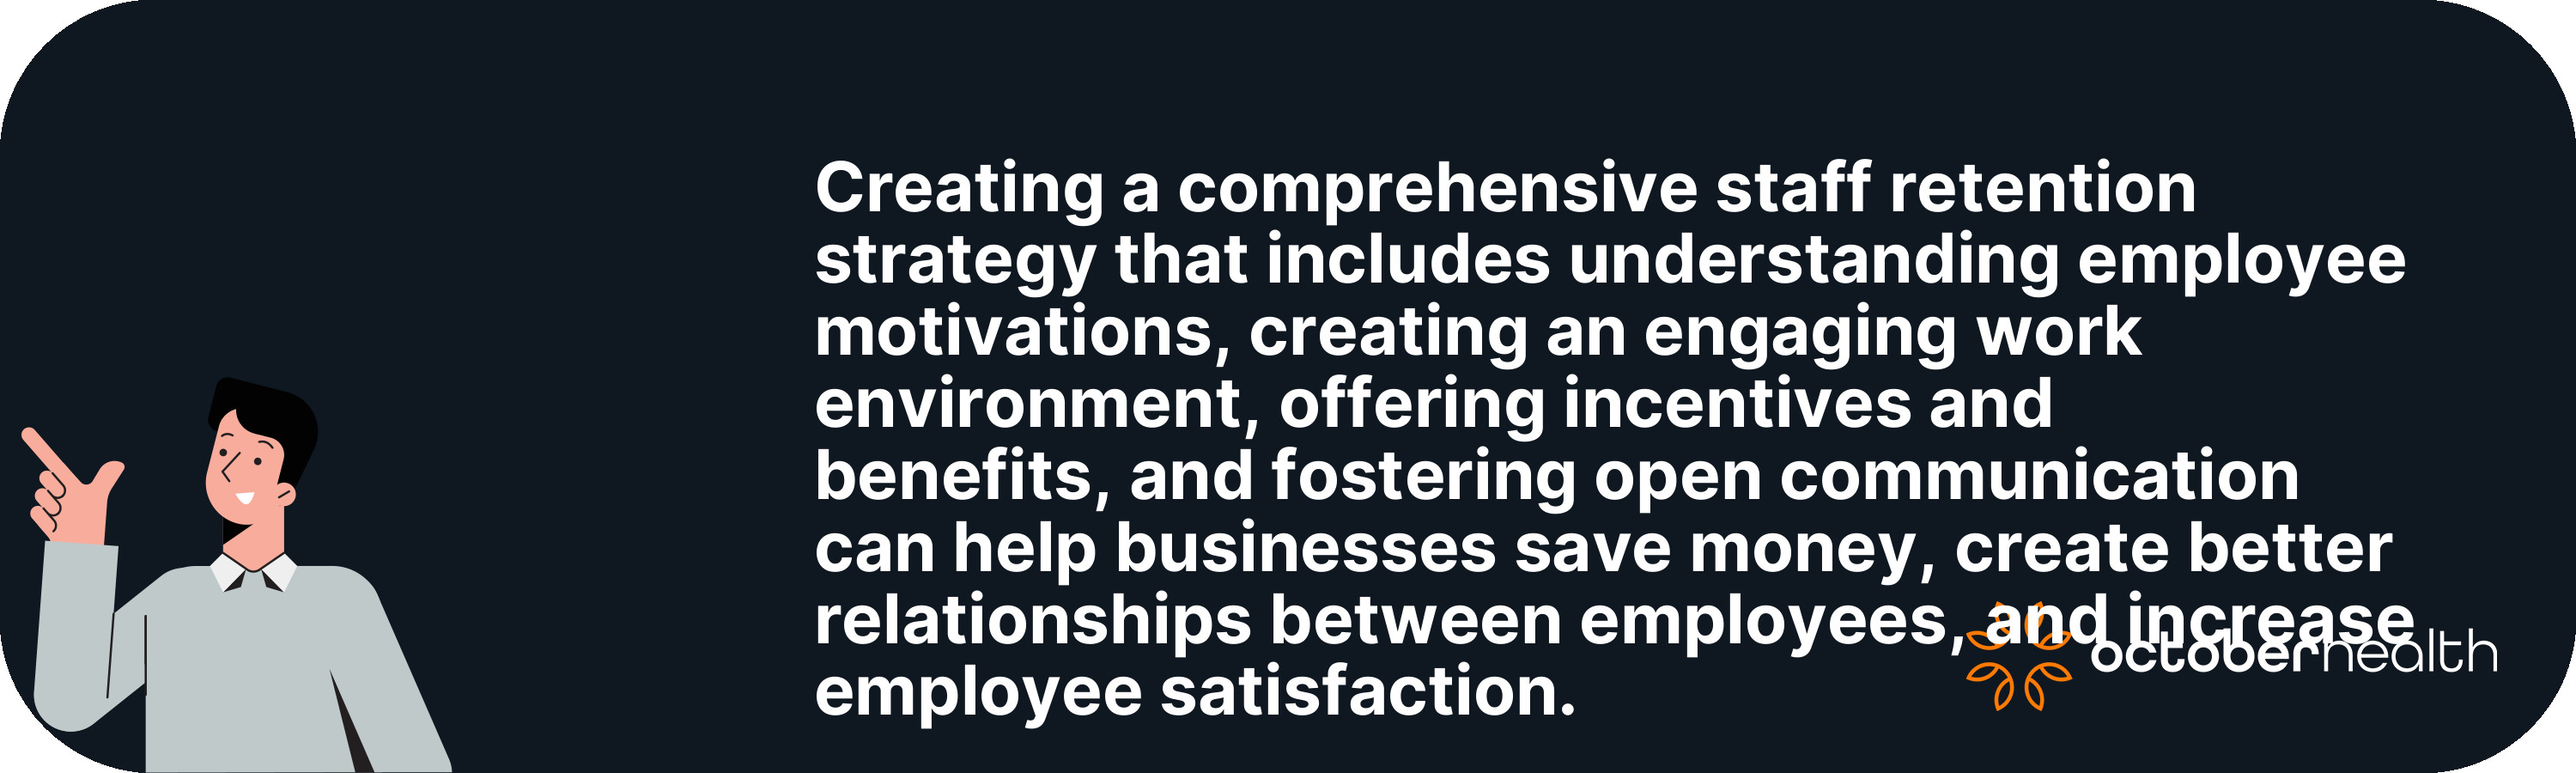 Creating a comprehensive staff retention strategy...